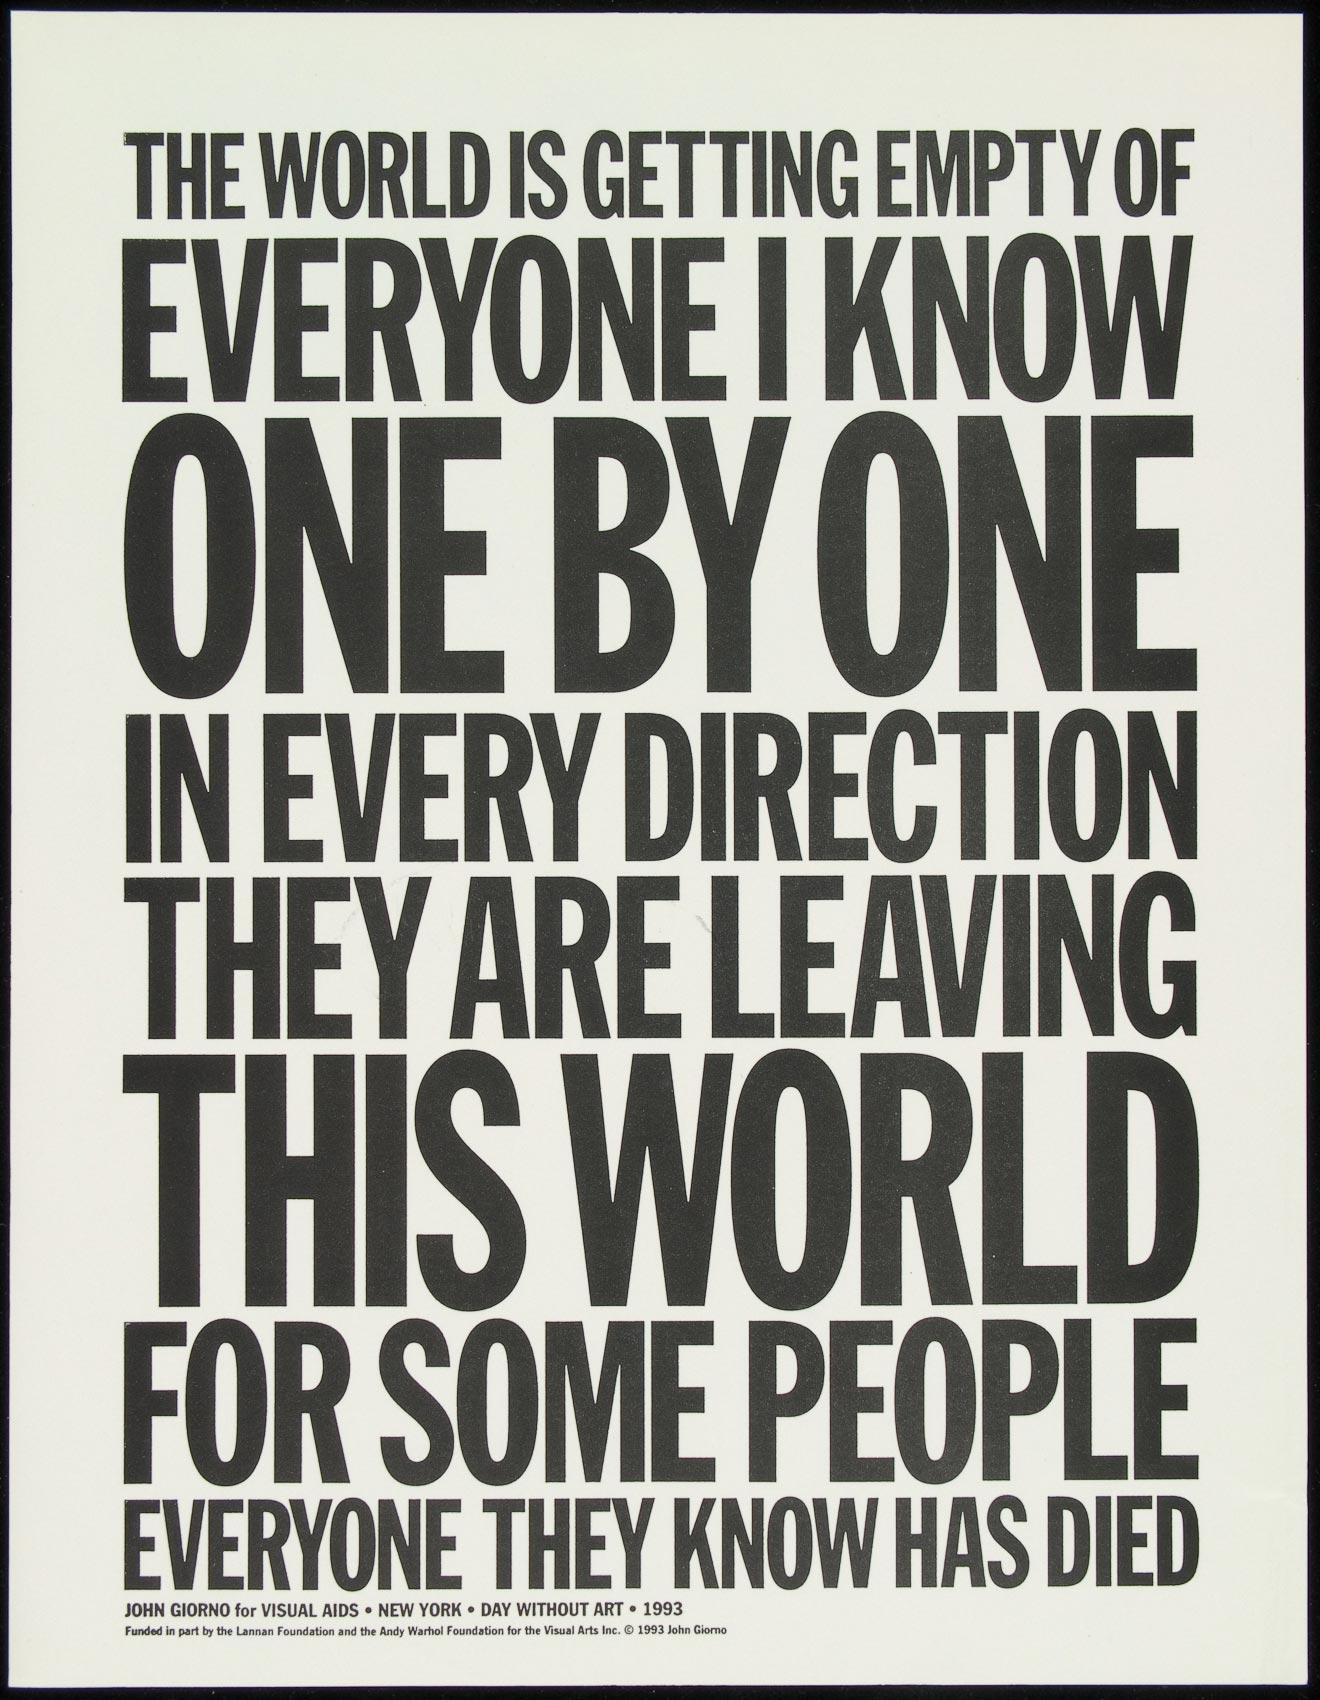 A simple text-based poster, black text on white, reads: The world is getting empty of everyone I know one by one in every direction they are leaving this world for some people everyone they know has died.